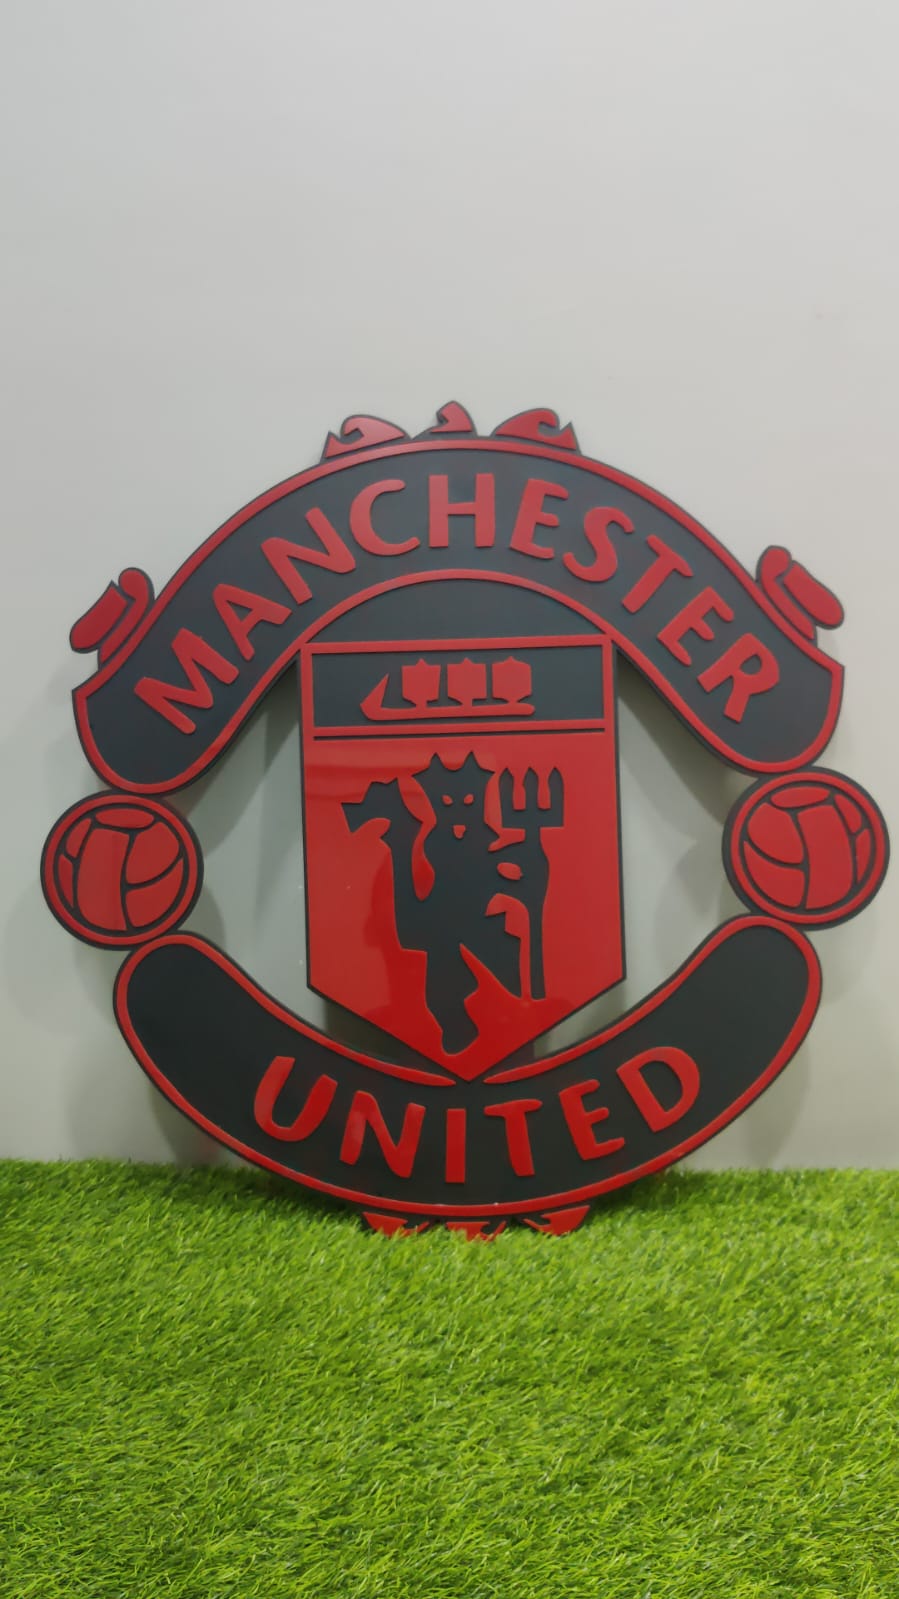 Red and black MDF wall art of Manchester united soccer team on green grass